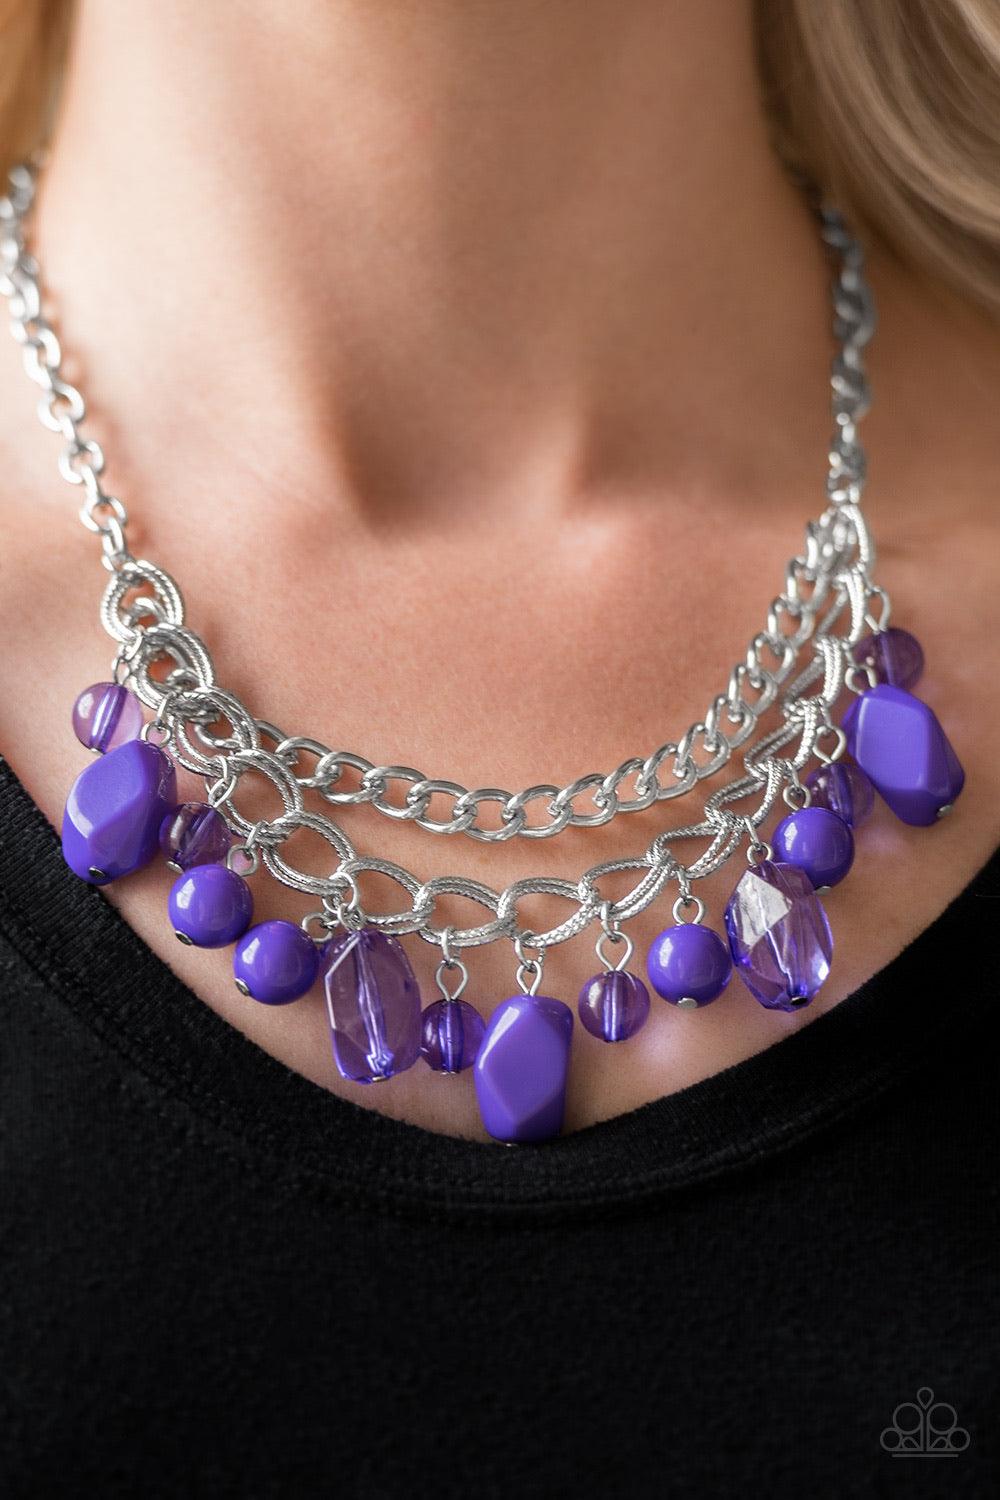 Paparazzi Accessories Brazilian Bay - Purple Featuring glassy and polished finishes, round and asymmetrical purple beads trickle from the bottom of a double-linked silver chain. An additional silver chain is layered above the summery beading for a seasona